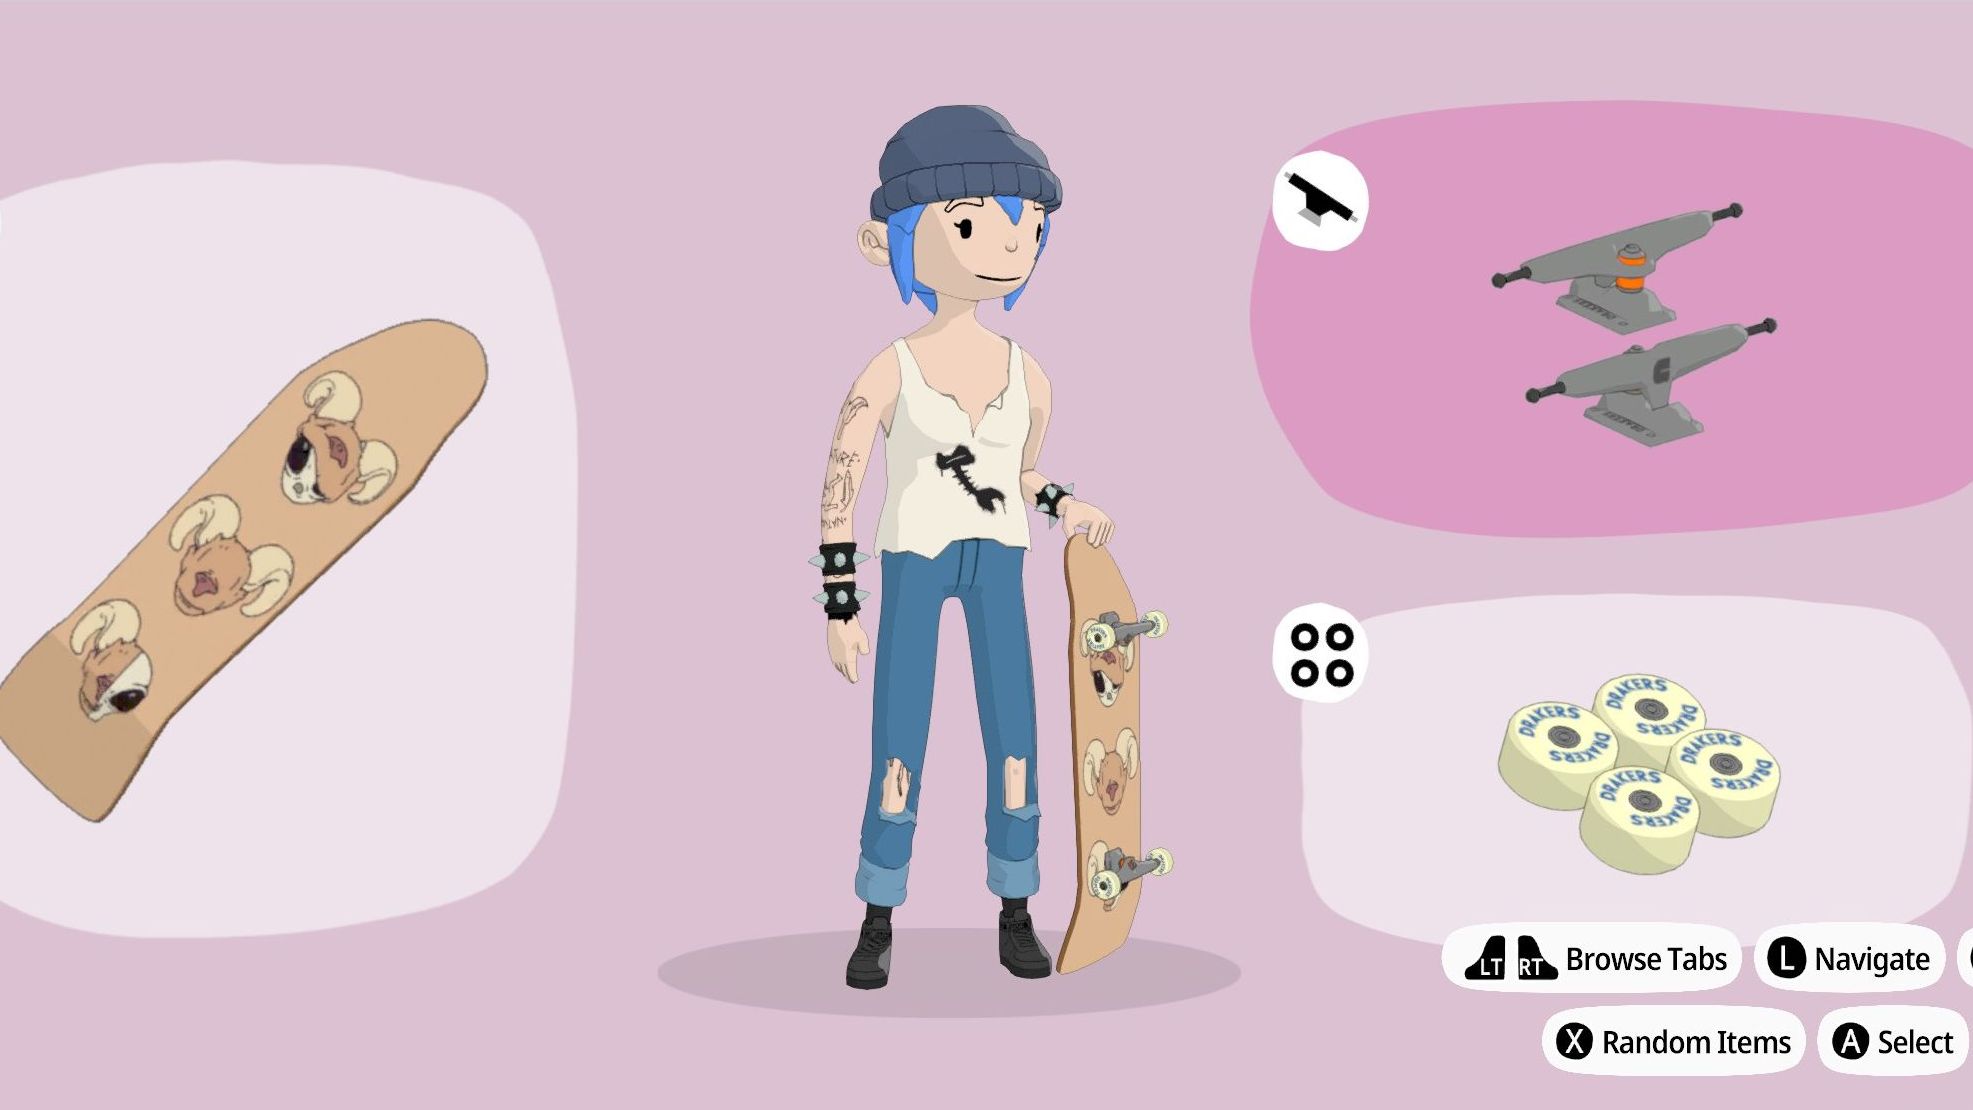 Chloe from Life Is Strange as a skater in the OlliOlli World character creator